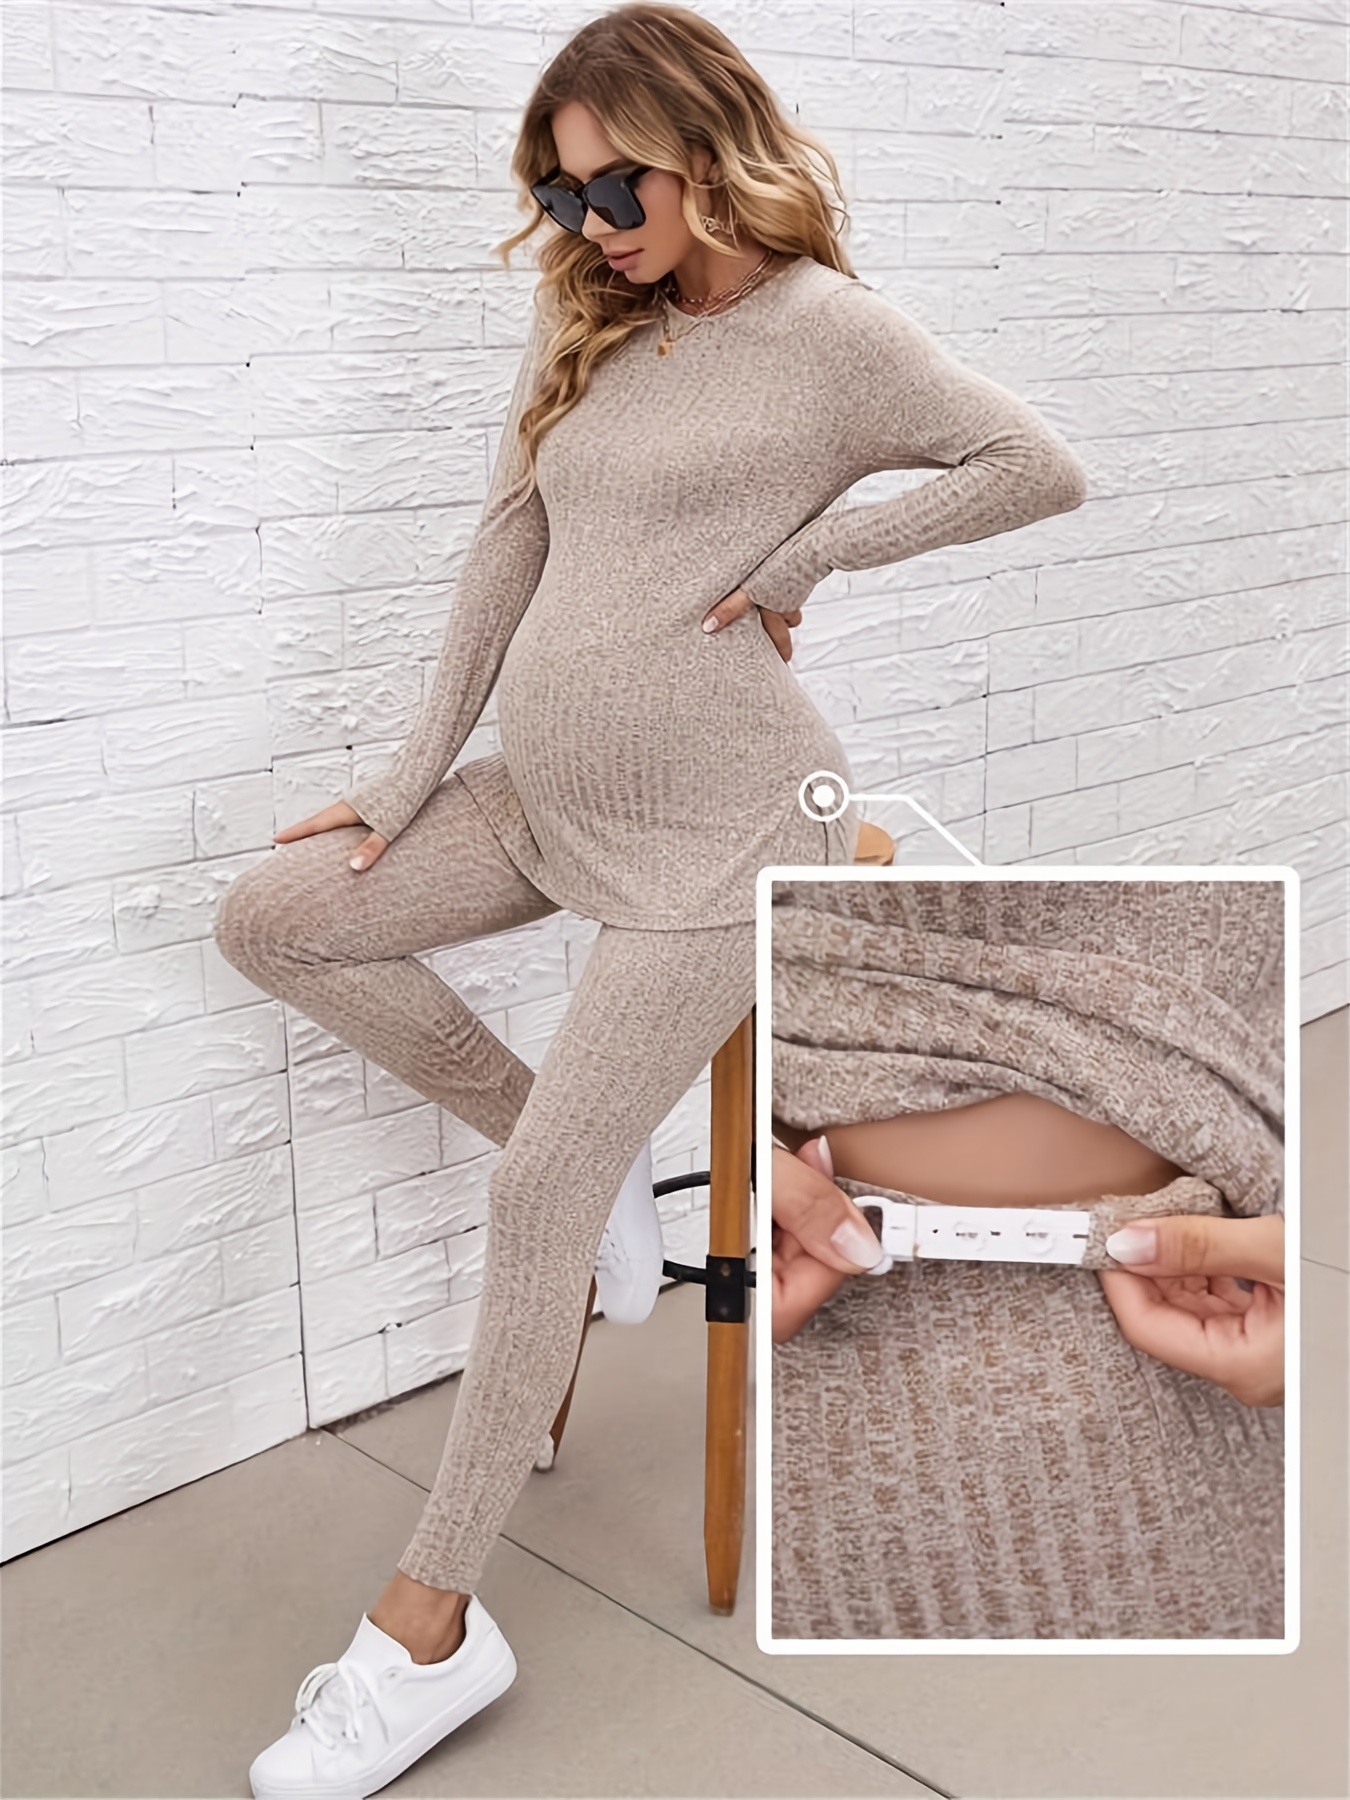 Maternity Pregnant Women's Pajama Sets, Comfy Loose V Neck Long Sleeves  Button Up Top & Slightly Stretch Pants For Pregnancy Care